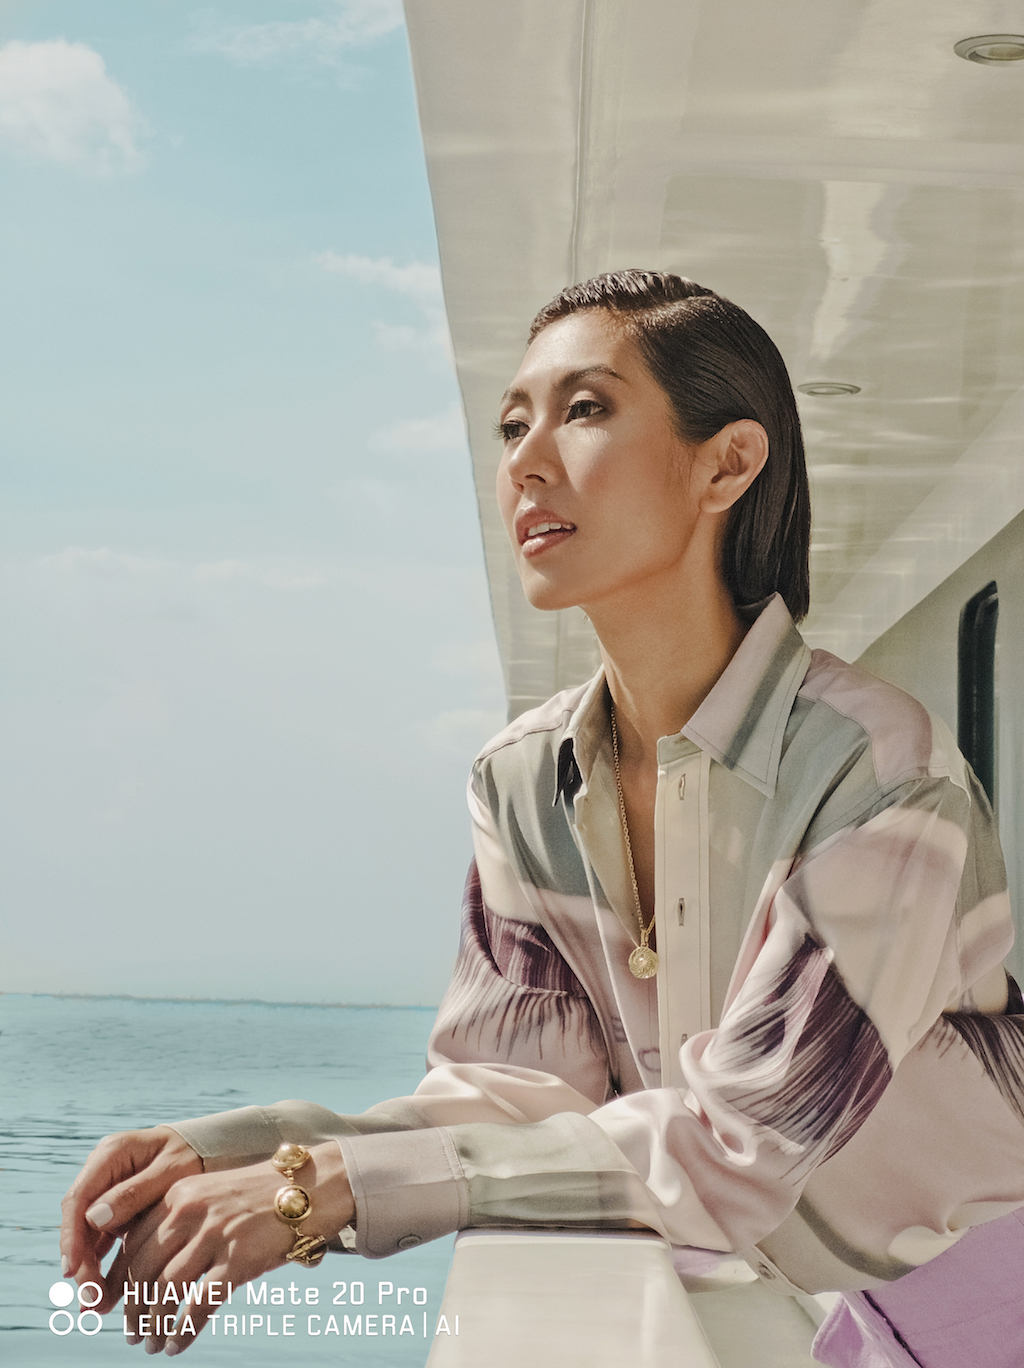 Liz Uy for Lifestyle Asia November 2018 Issue (Photograph by Charisma Lico, shot with a Huawei Mate 20 Pro) 